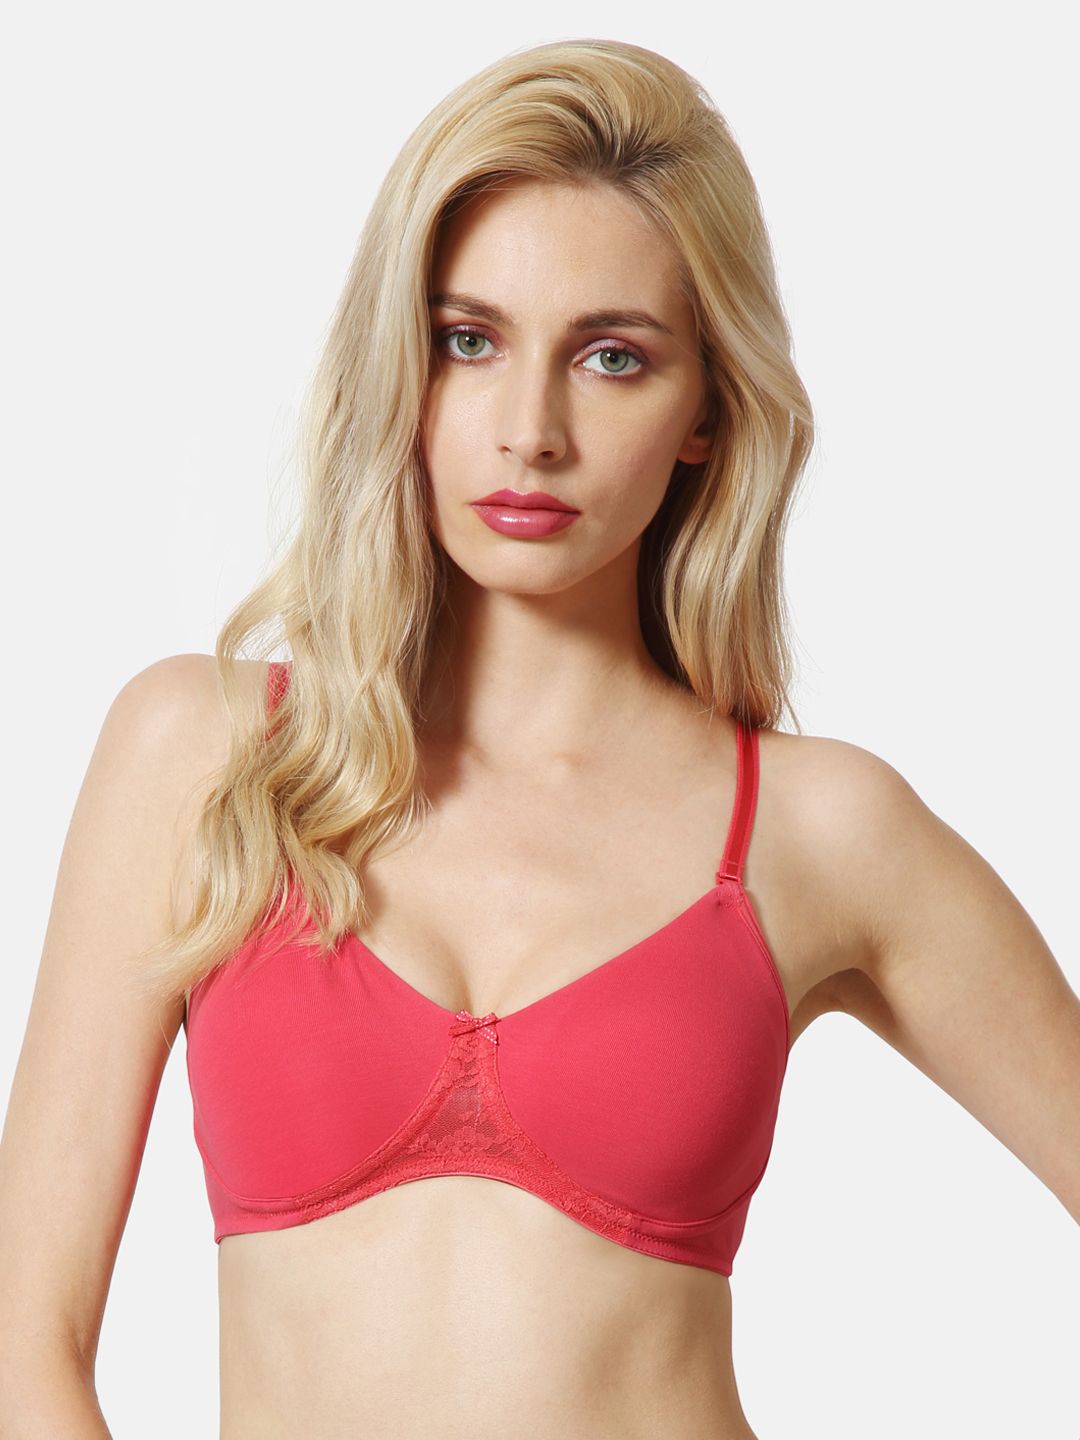 Van Heusen Coral Red Solid Non-Wired Non Padded Seamless Shaper Bra ILIBR1CSSWW1211001 Price in India